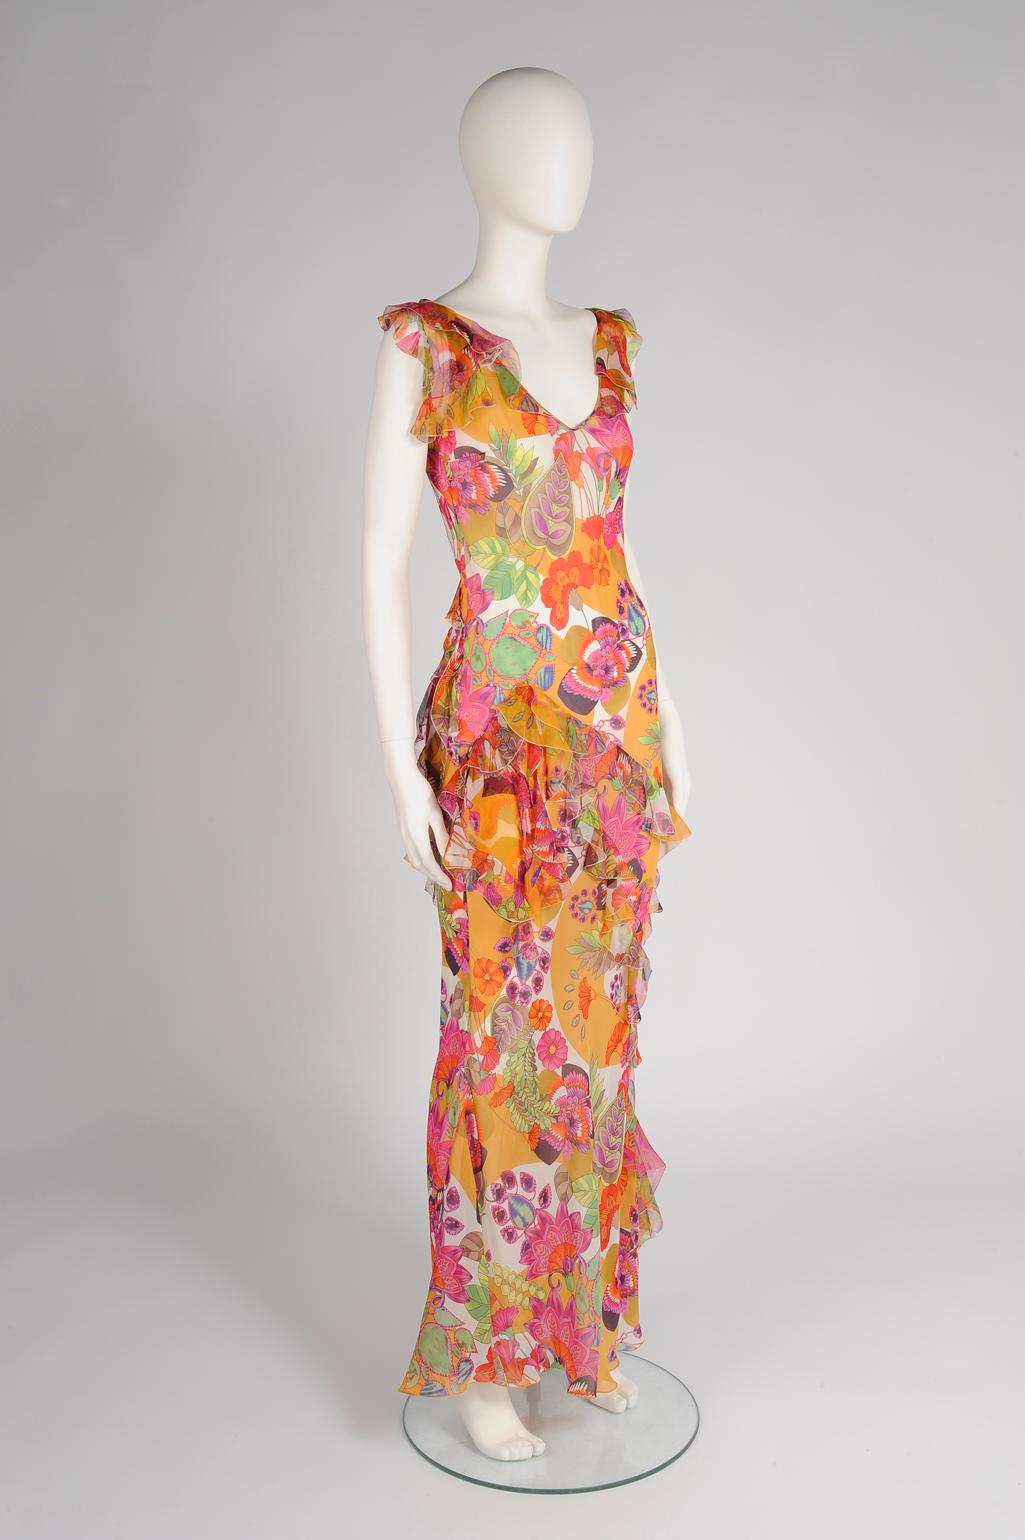 Julia's Dressing Vintage is proud to offer this stunning vintage John Galliano for Christian Dior evening gown. Cut on the bias from light and airy floral-print silk chiffon to skim your figure, the dress is detailed with romantic ruffles. Elegant